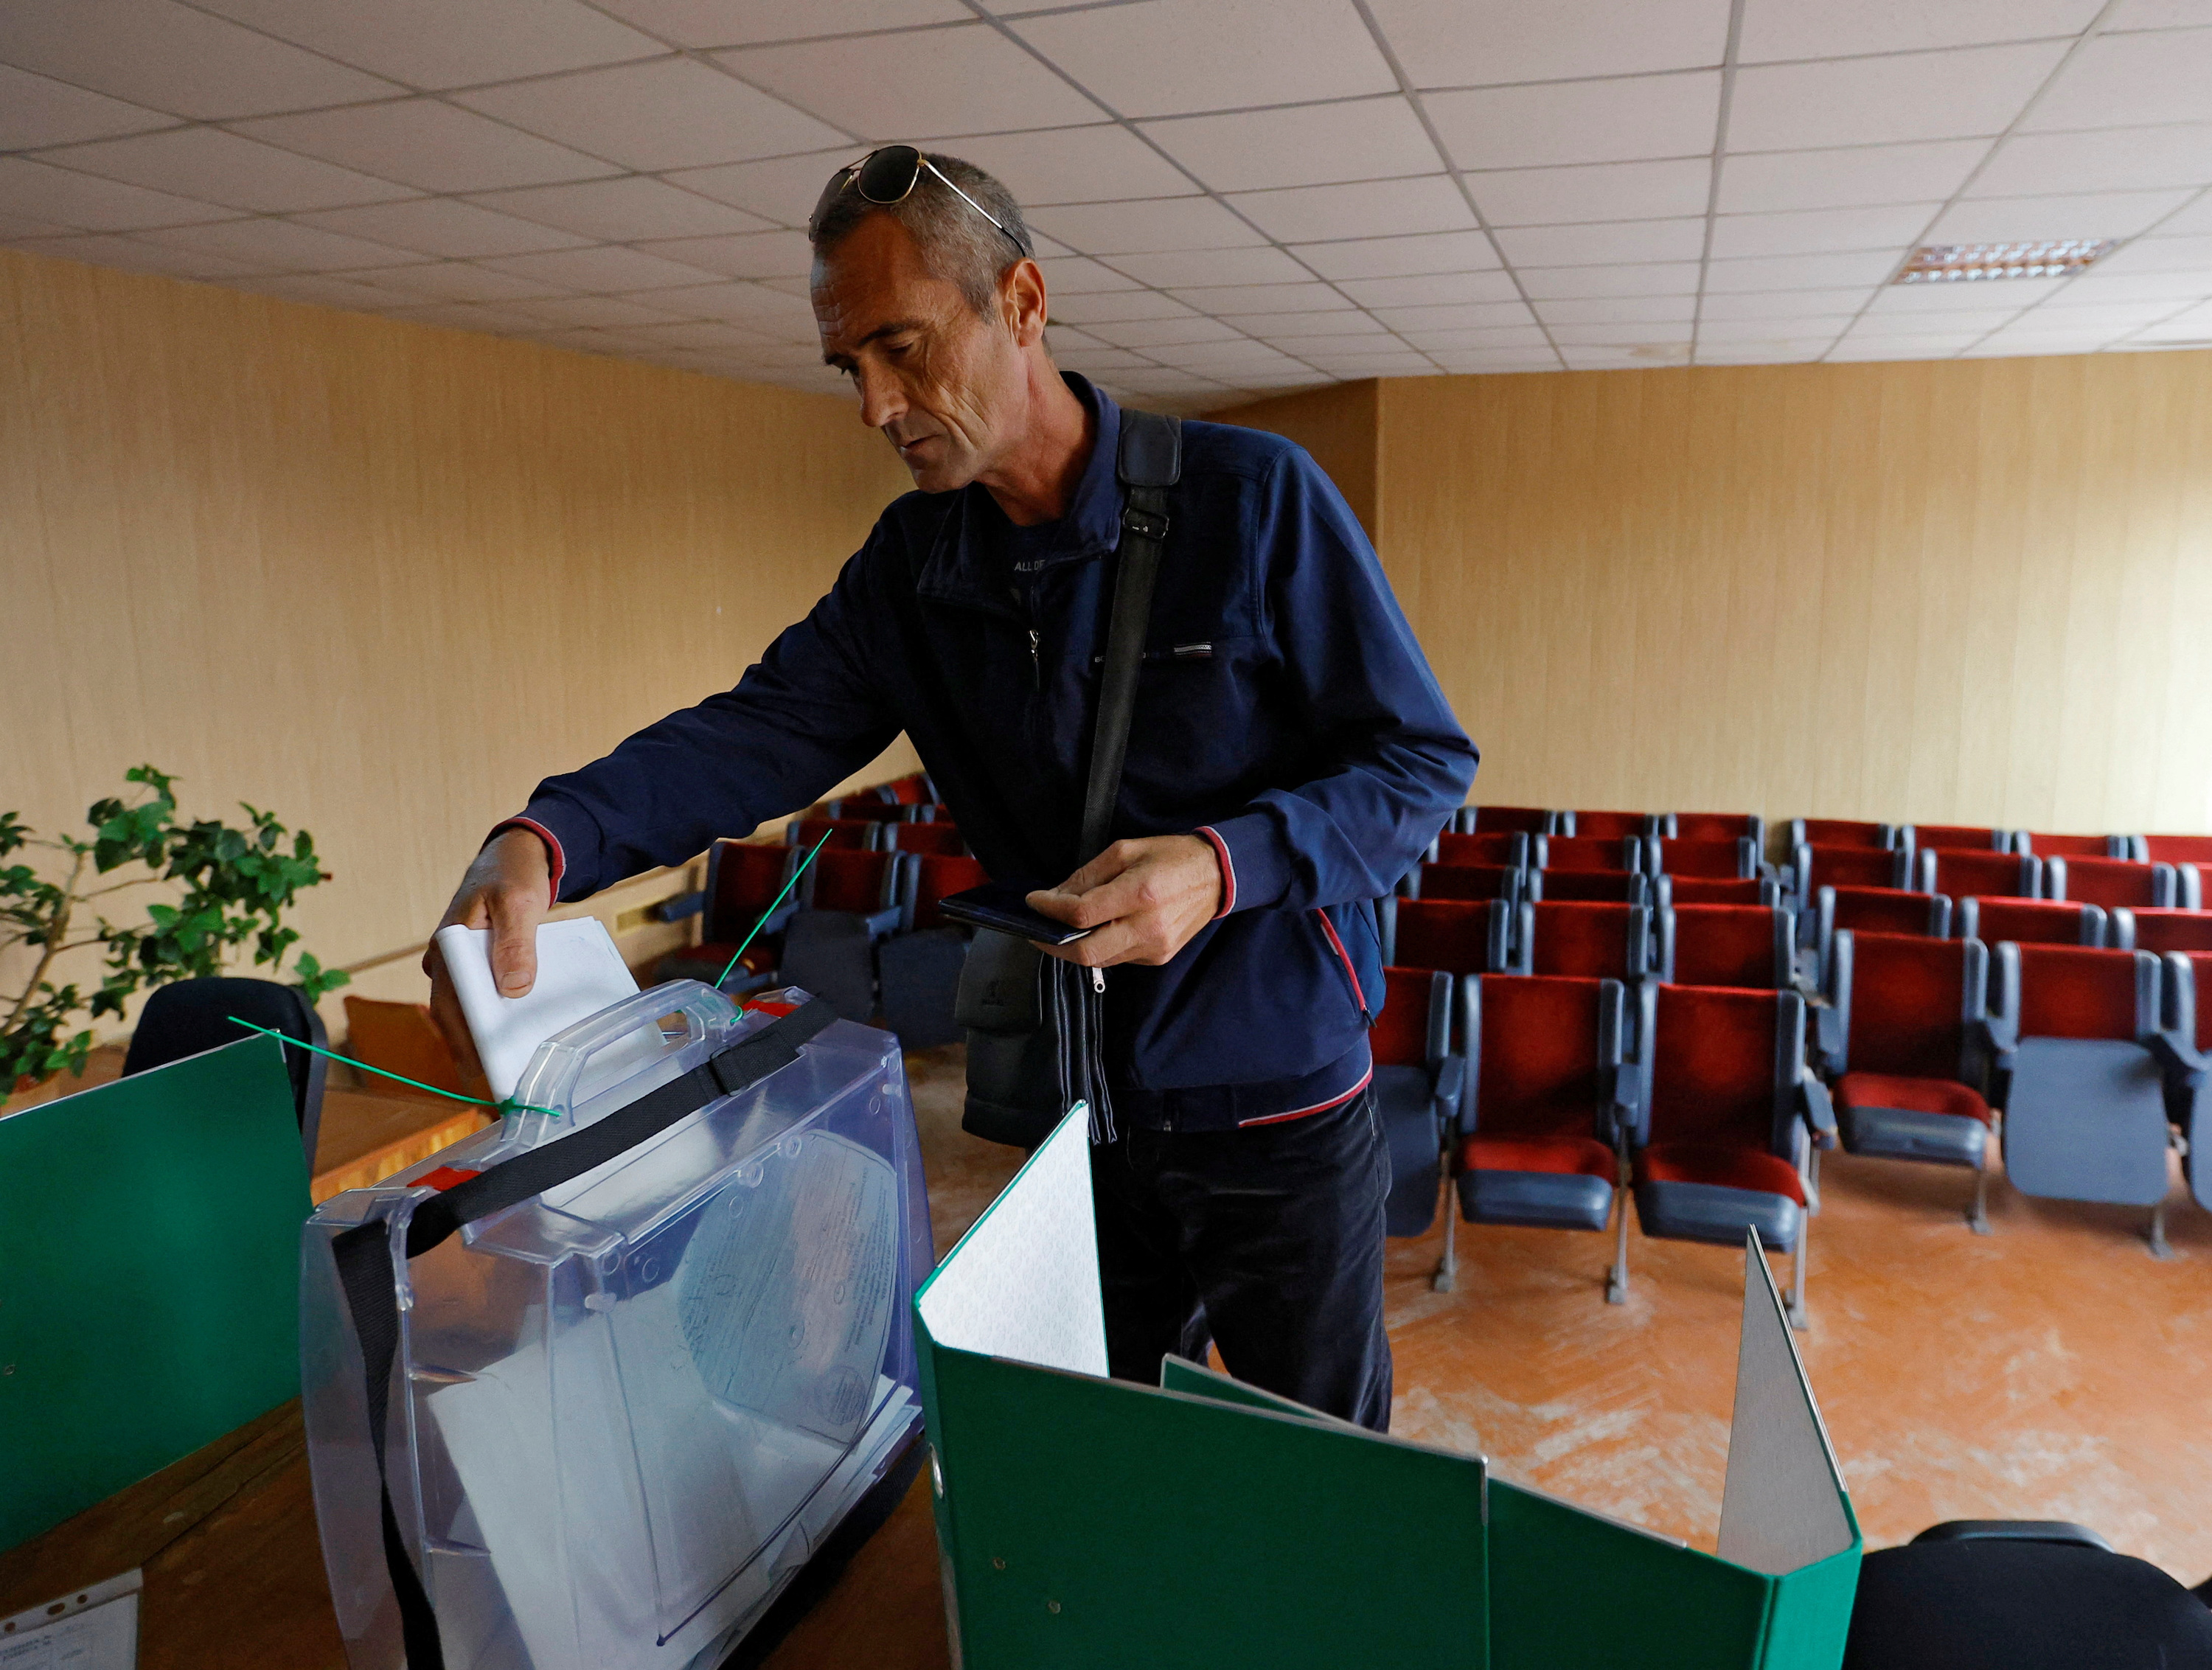 A man casts his ballot during a referendum on the secession of Zaporizhzhia region from Ukraine in the Russian-controlled city of Melitopol on September 26.